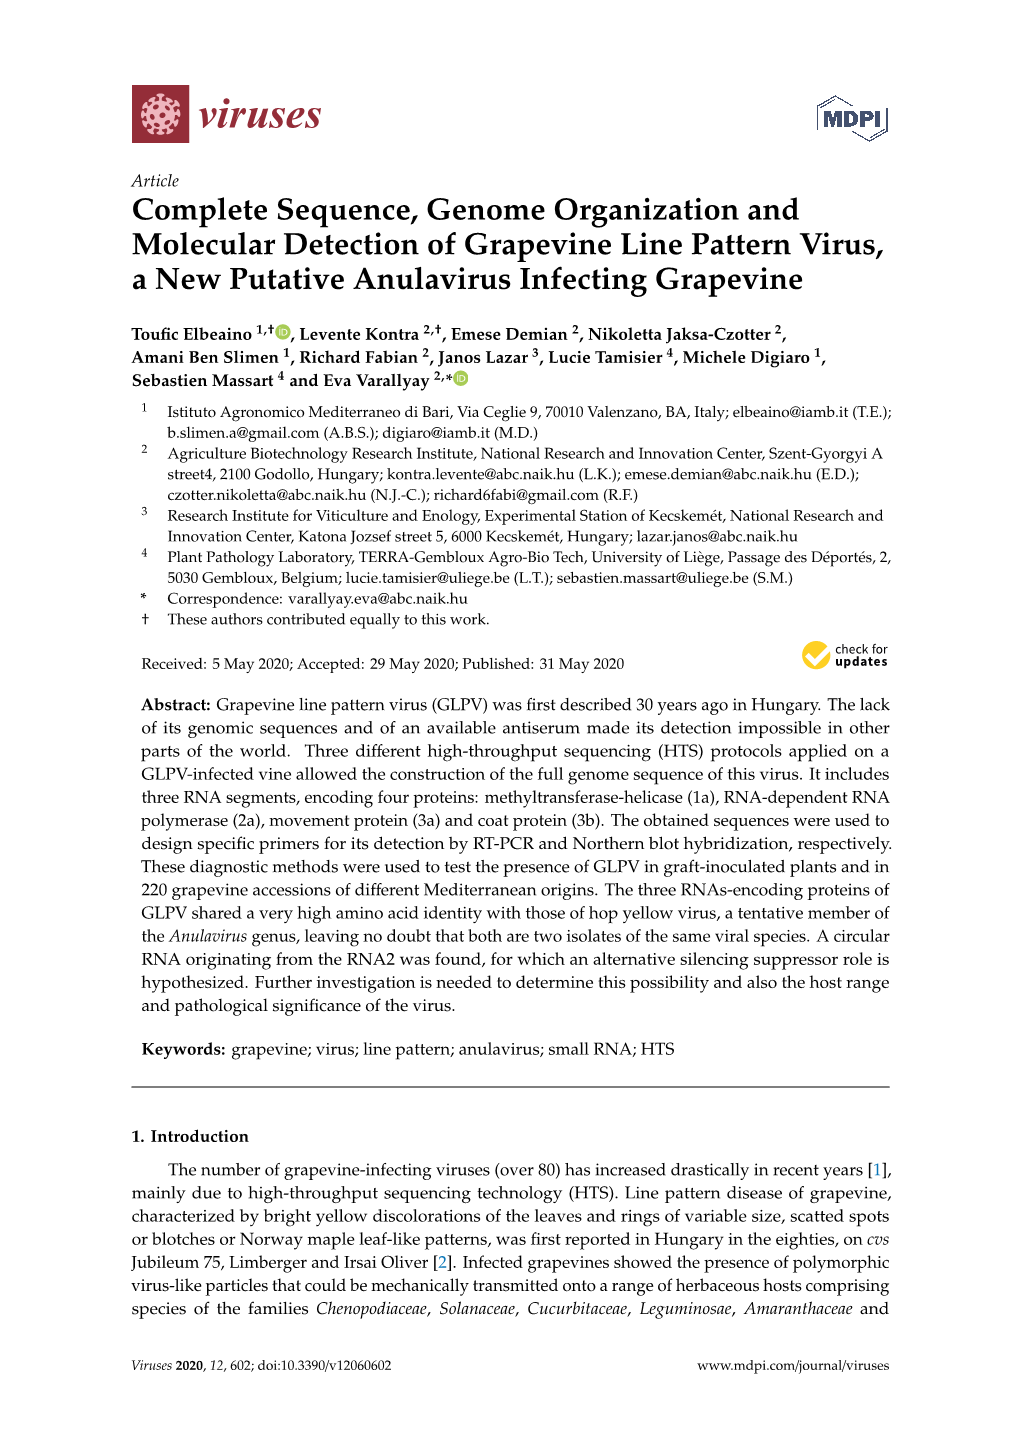 Complete Sequence, Genome Organization and Molecular Detection of Grapevine Line Pattern Virus, a New Putative Anulavirus Infecting Grapevine